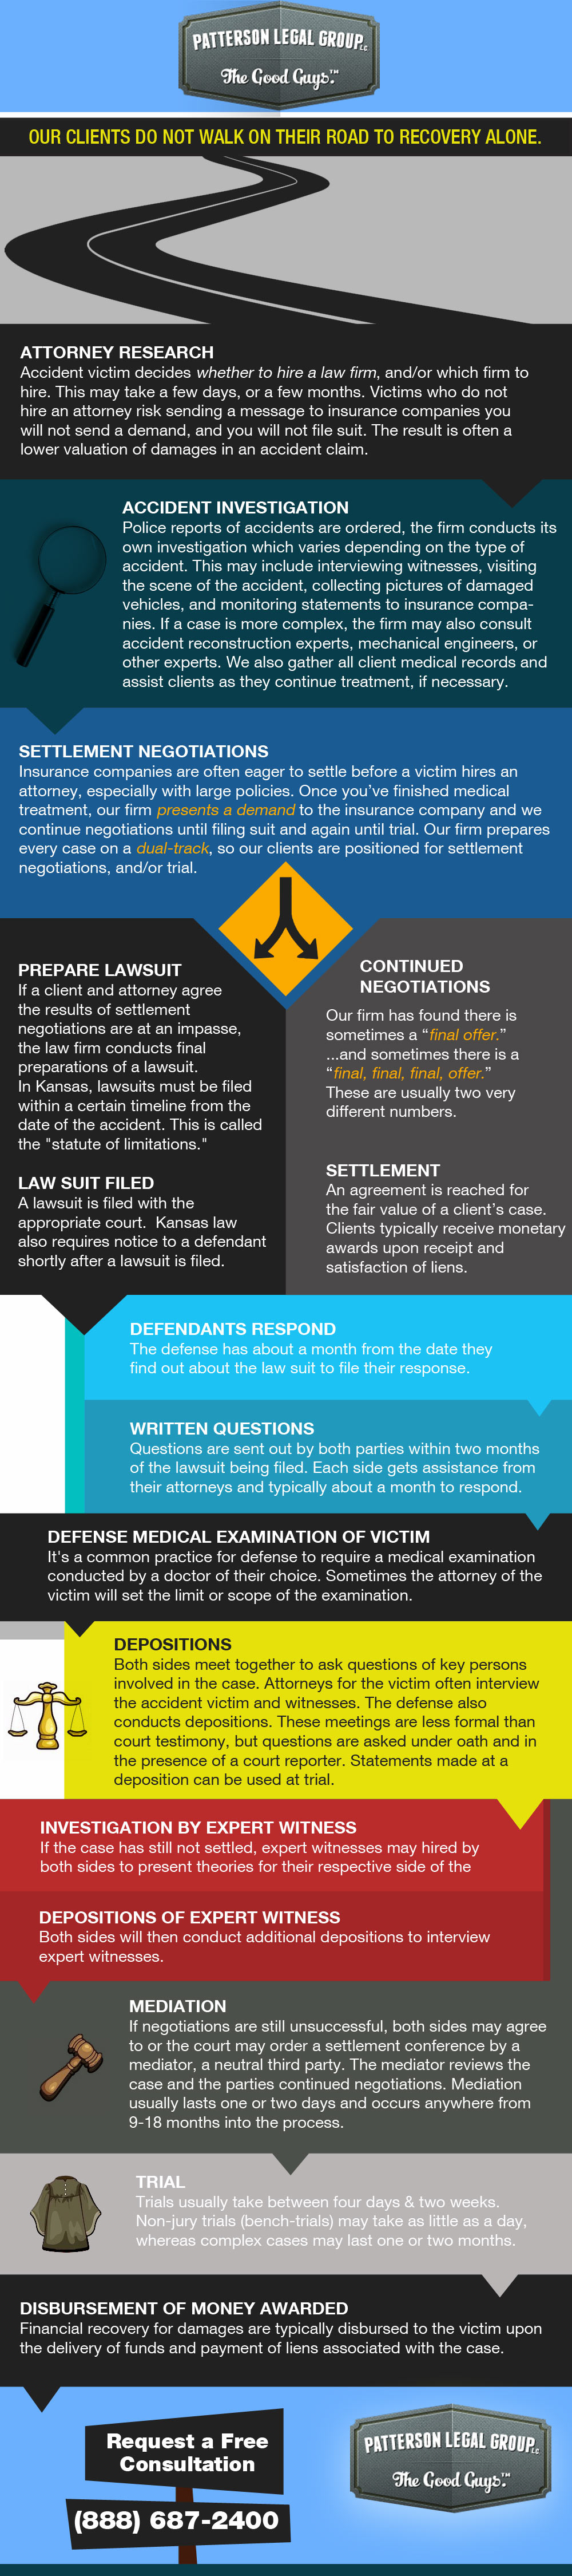 This graphic illustrates the timeline of a personal injury accident case or claim in Kansas